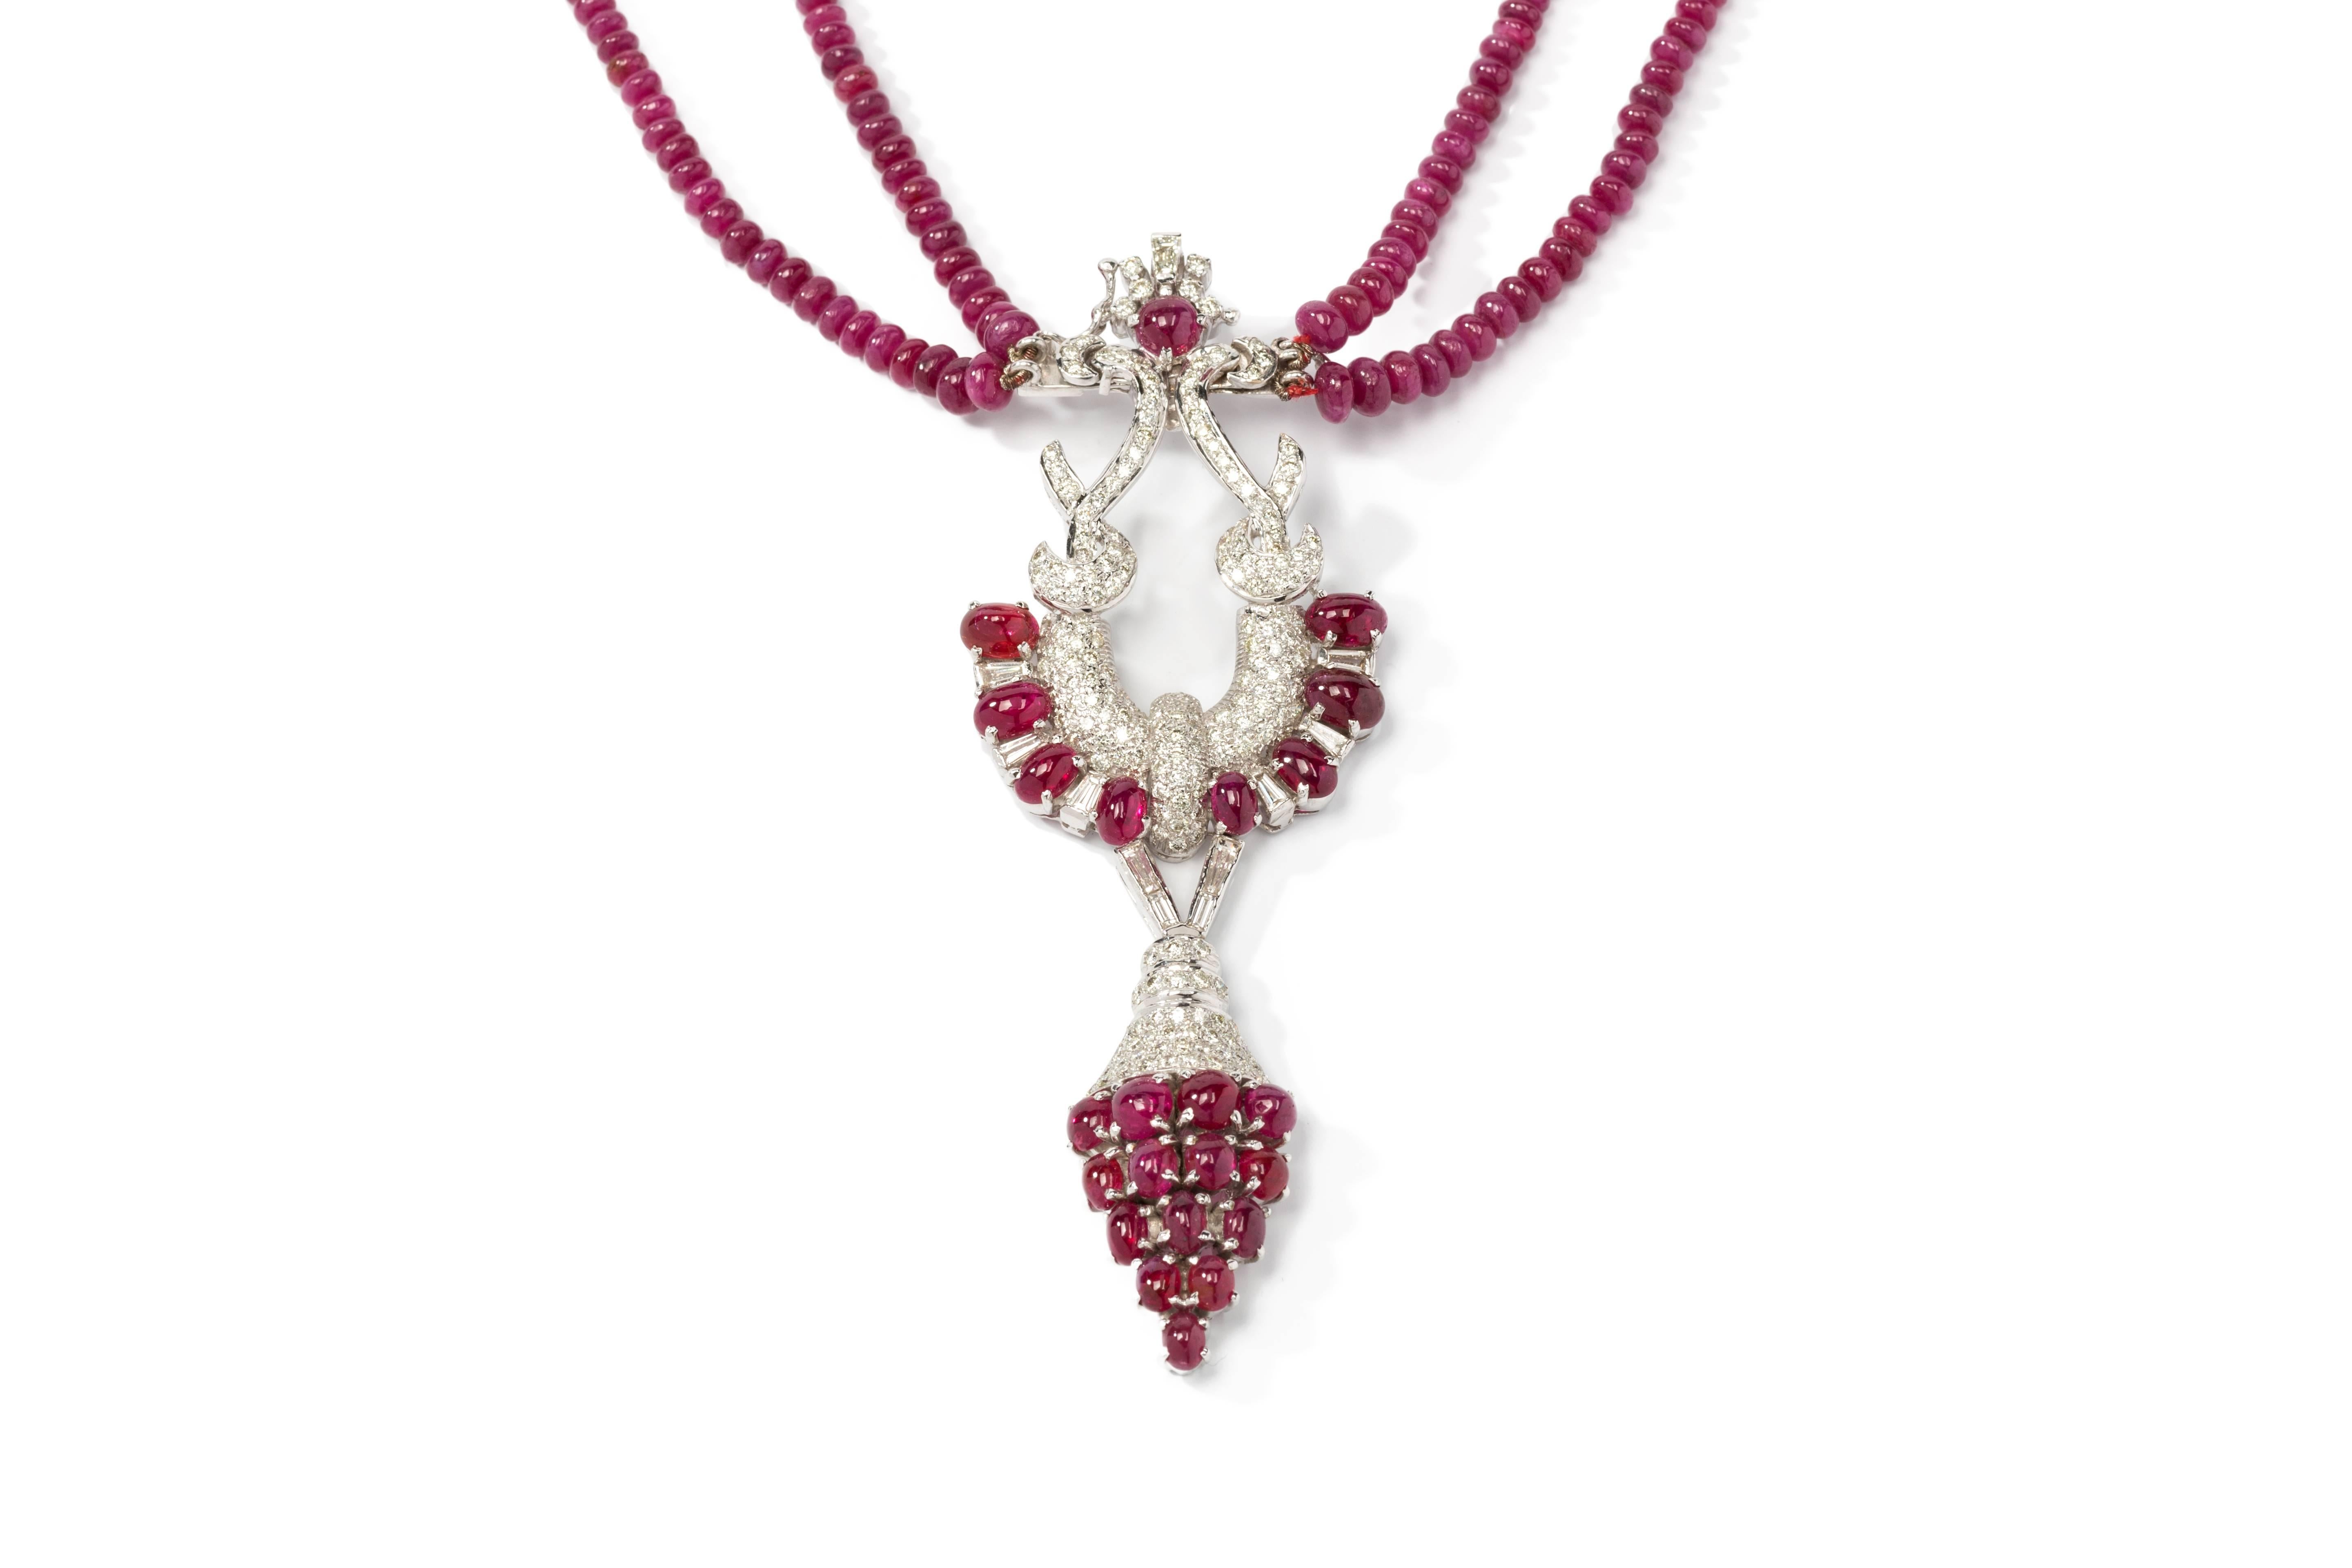 Pavé Set with 23 cabochon-cut rubies weighing 13,4 ct. and 435 ball shape rubies weighing approximately 101,60 ct. Enhanced by 11 baguette-cut diamonds and 207 brilliant-cut diamonds weighing circa 3,47 ct. 
Mounted in 18K white gold. Total weight: